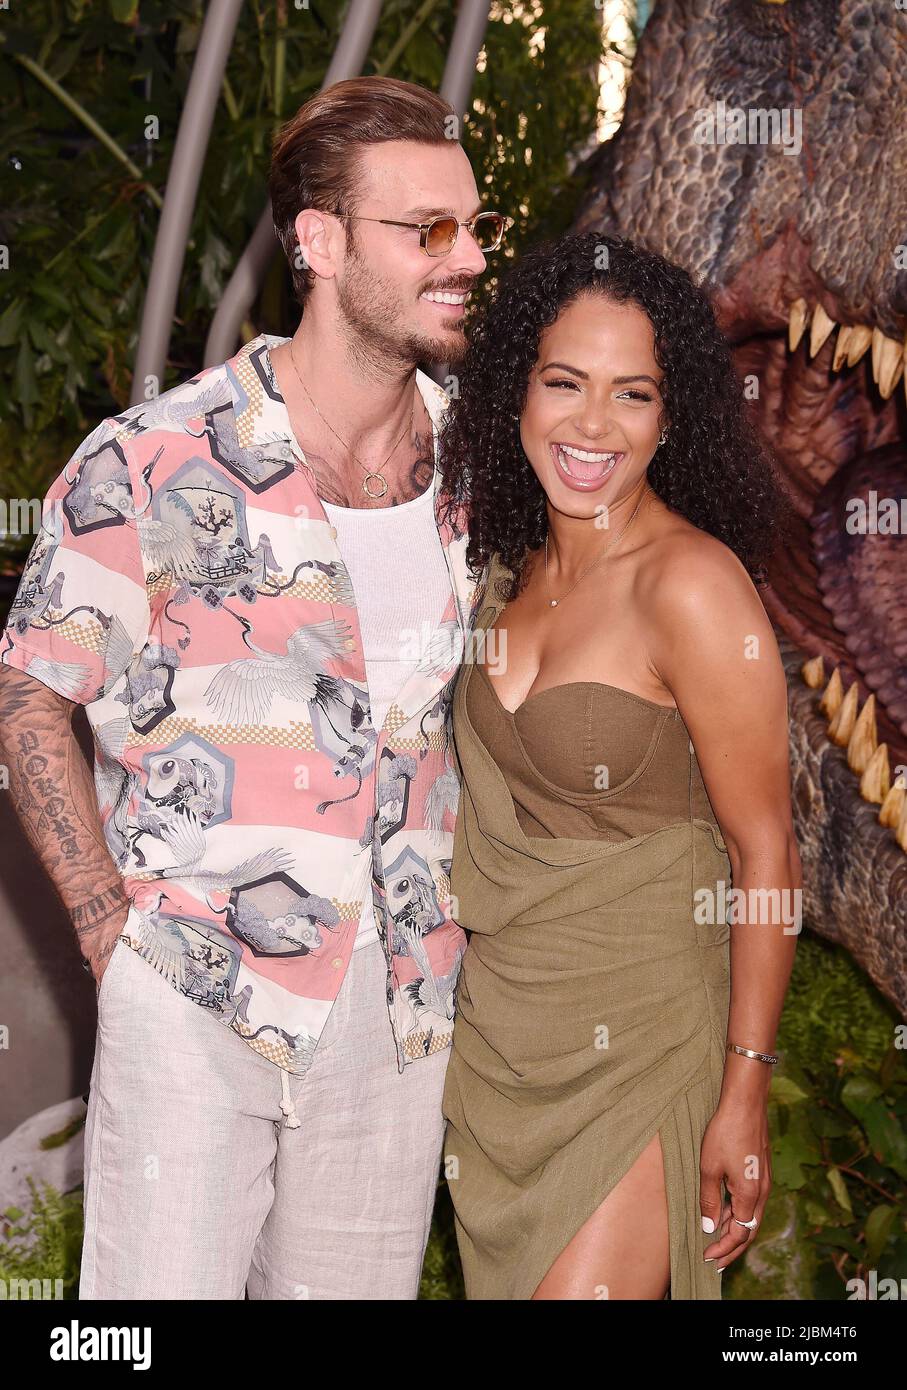 HOLLYWOOD, CA - JUNE 06: (L-R) Matt Pokora and Christina Milian attend the Los Angeles premiere of Universal Pictures' 'Jurassic World Dominion' at th Stock Photo